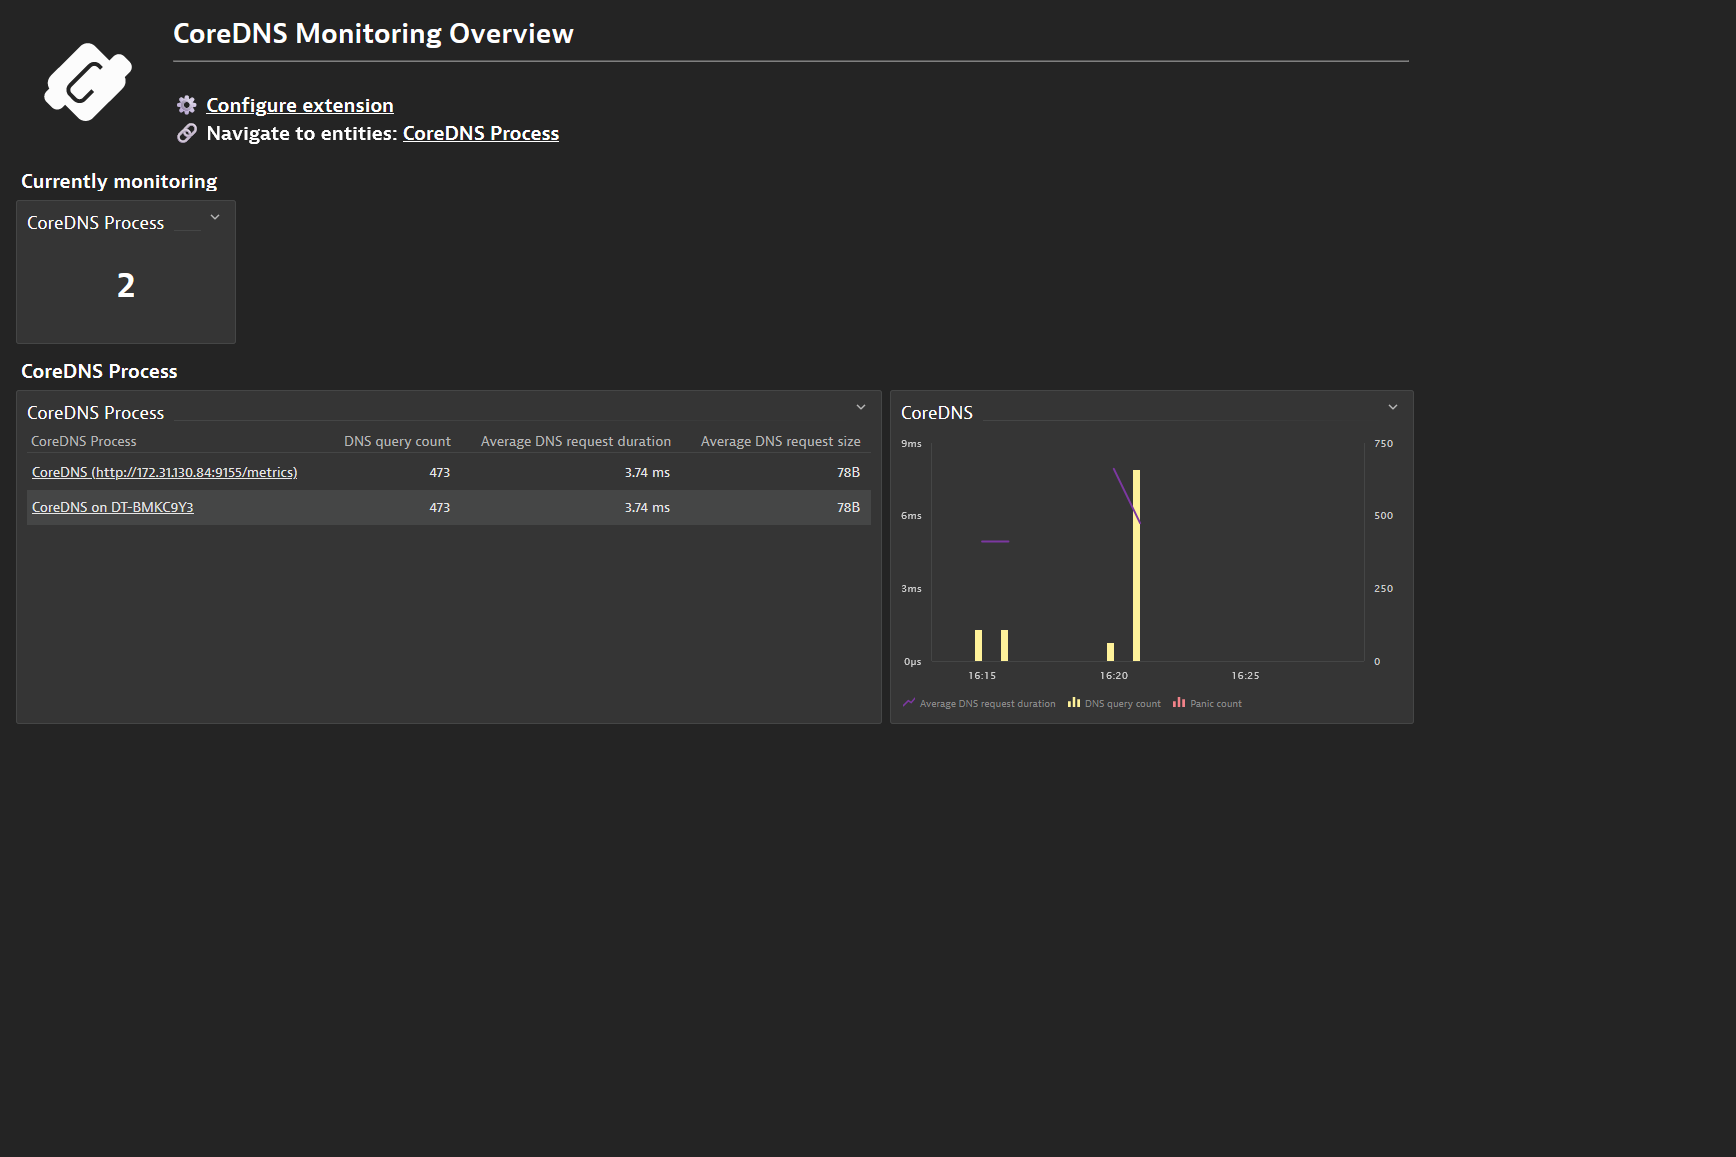 The overboard dashboard with links to the entity and configuration screens.